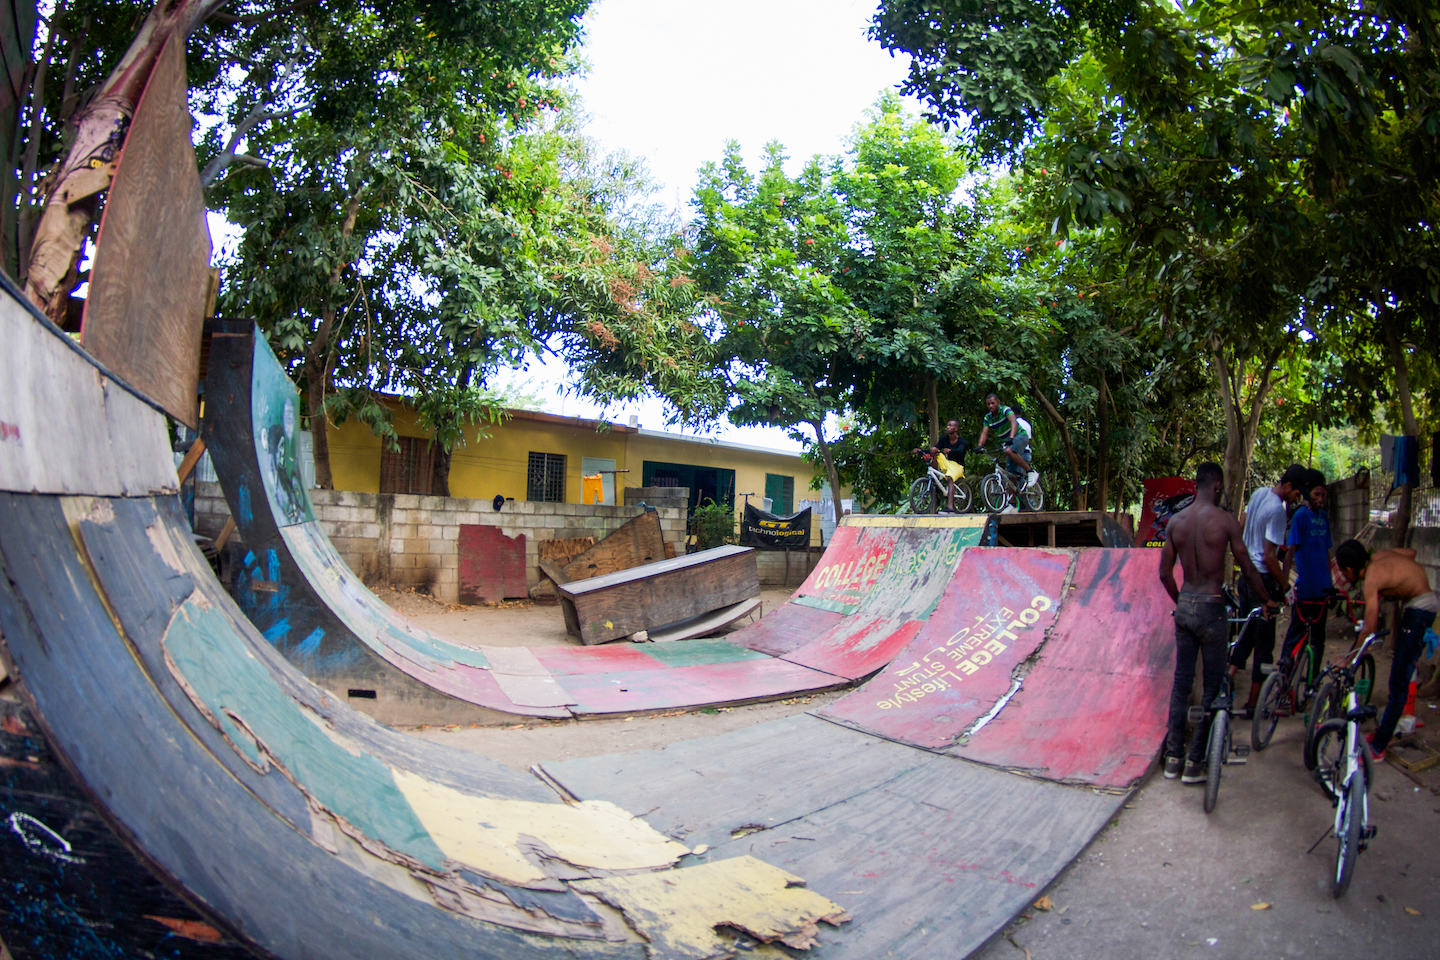 A photo of the vert ramps at a makeshift BMX and skatepark in Jamaica.